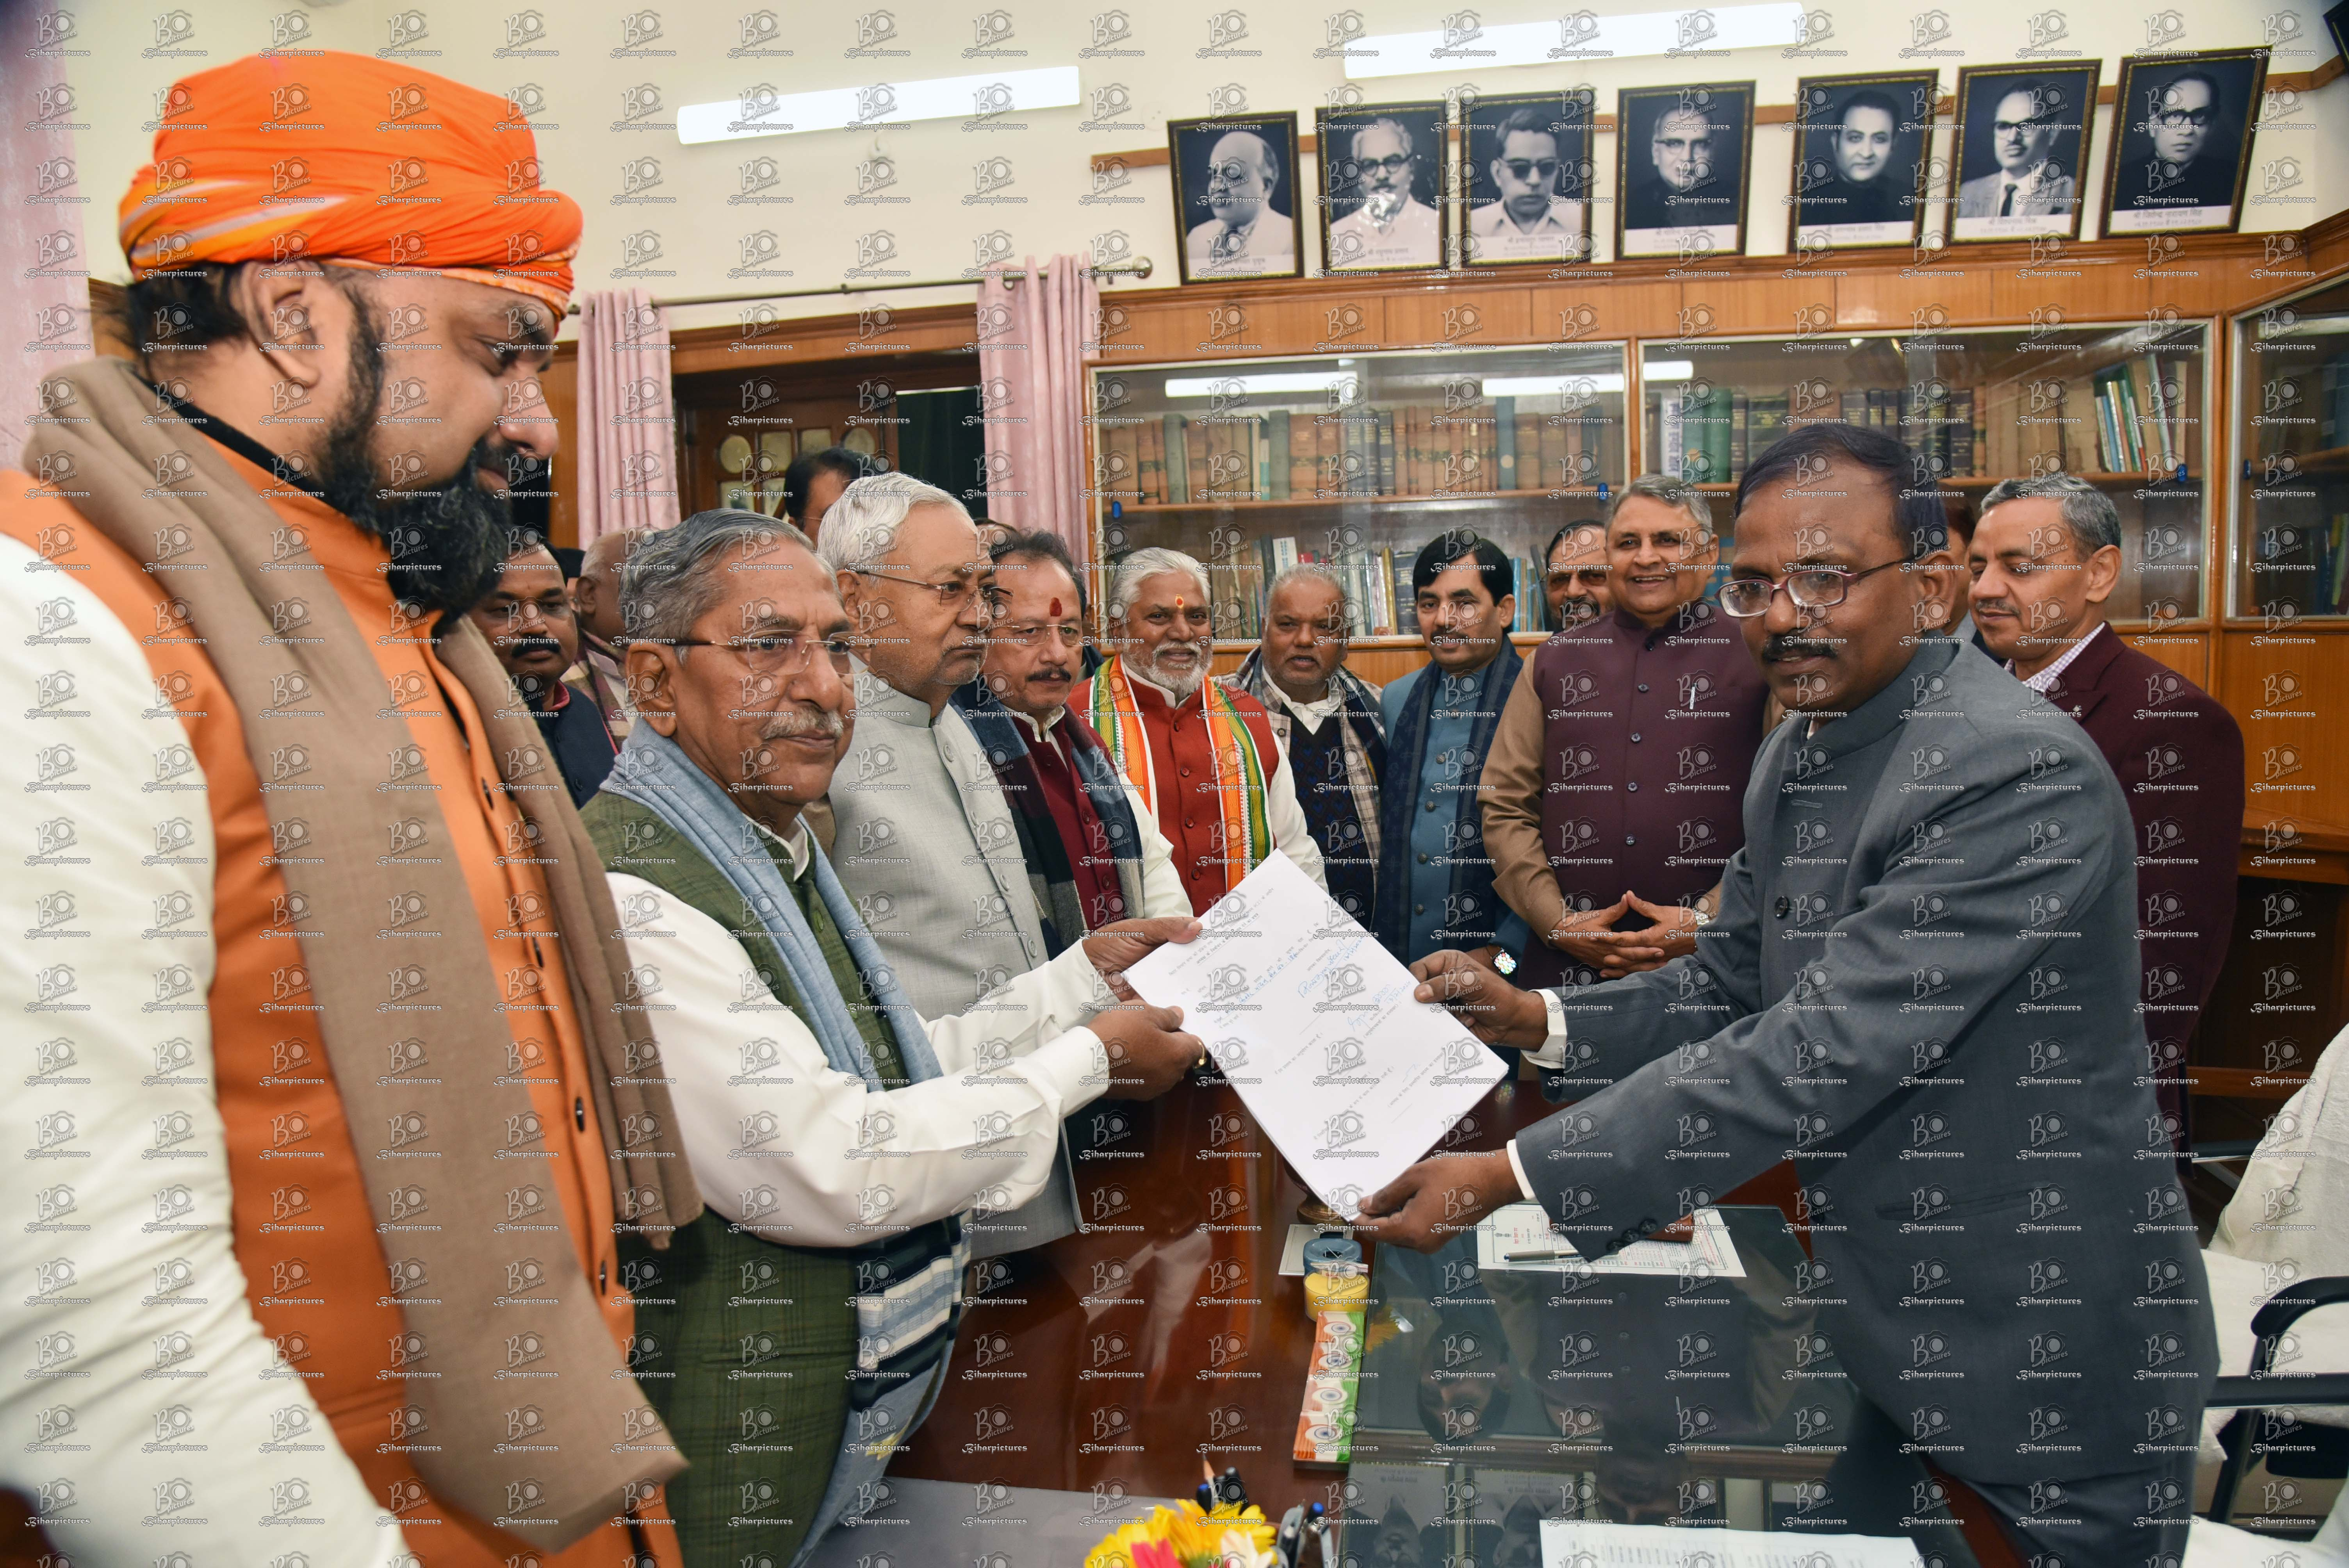 Chief Minister Shri Nitish Kumar, Bihar, participated in the nomination for the position of Speaker of the Legislative Assembly. BJP MLA Shri Nandkishor Yadav submitted his nomination papers for the position of Speaker of the Bihar Legislative Assembly. Location – Secretariat, Bihar Legislative Assembly, Patna. Date – 13.02.2024.